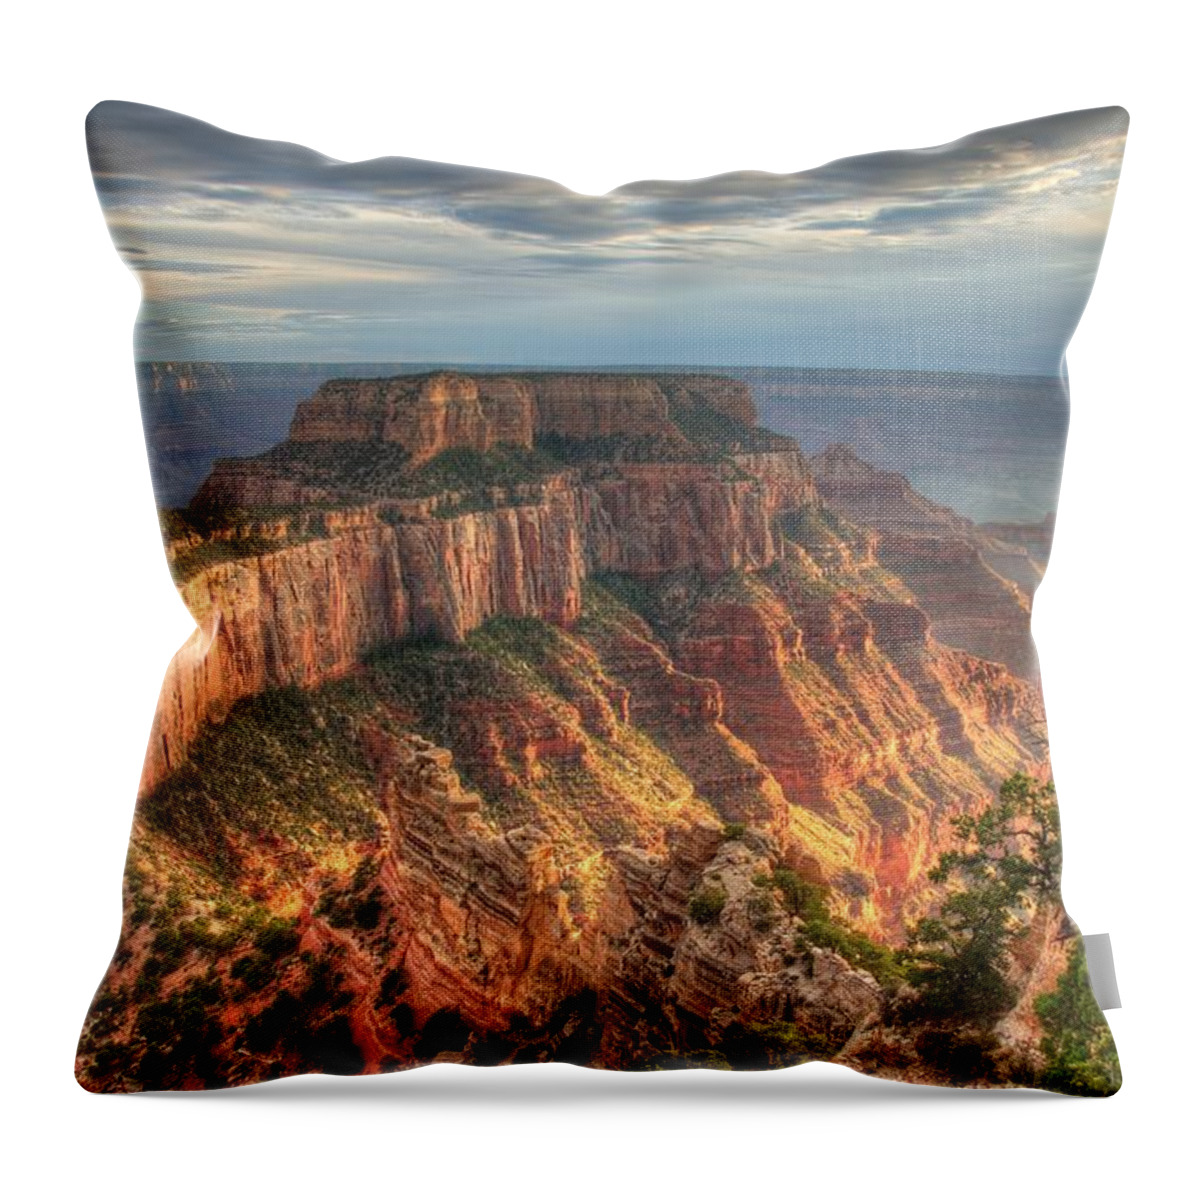 Wotan's Thronegrand Canyonlandscaperock Formation Throw Pillow featuring the photograph Wotan's Throne by Jeff Cook